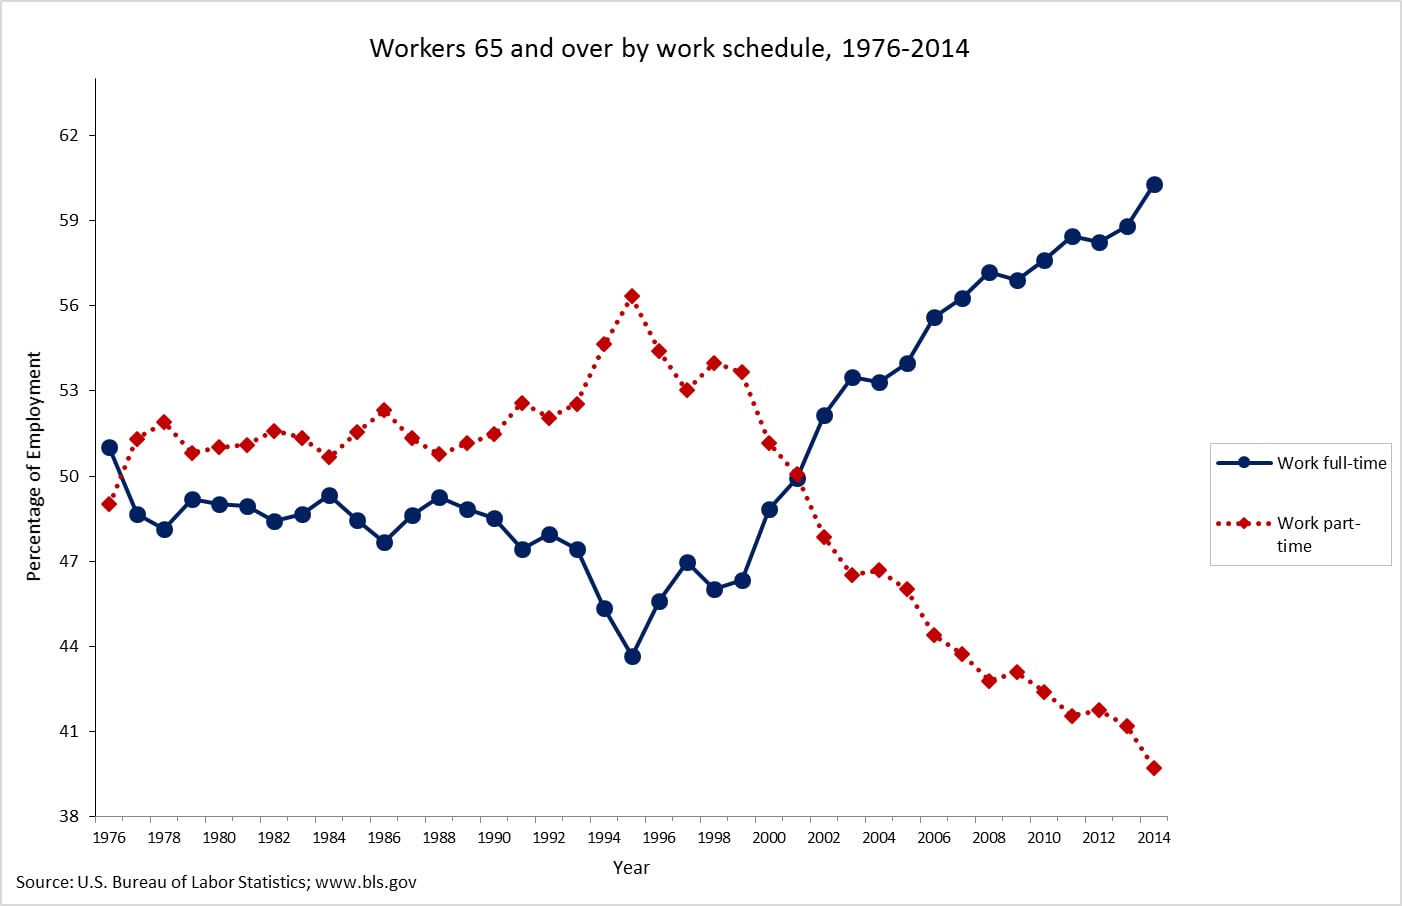 Graph showing workers 65 and over by work schedule (full-time versus part-time), from 1976-2014